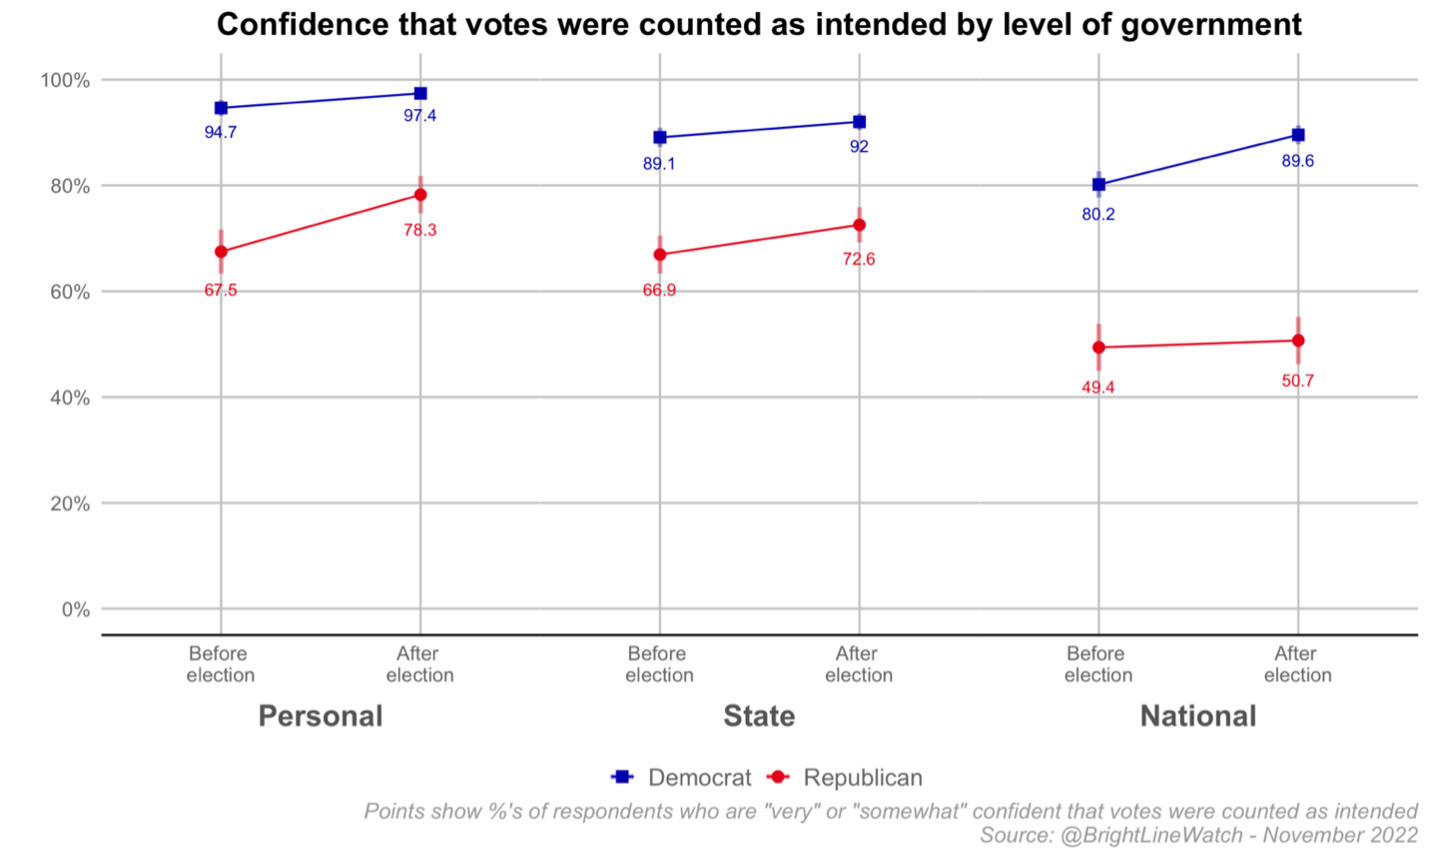 Graphic showing confidence votes counted as intended by party, level of government, both before and after midterm.